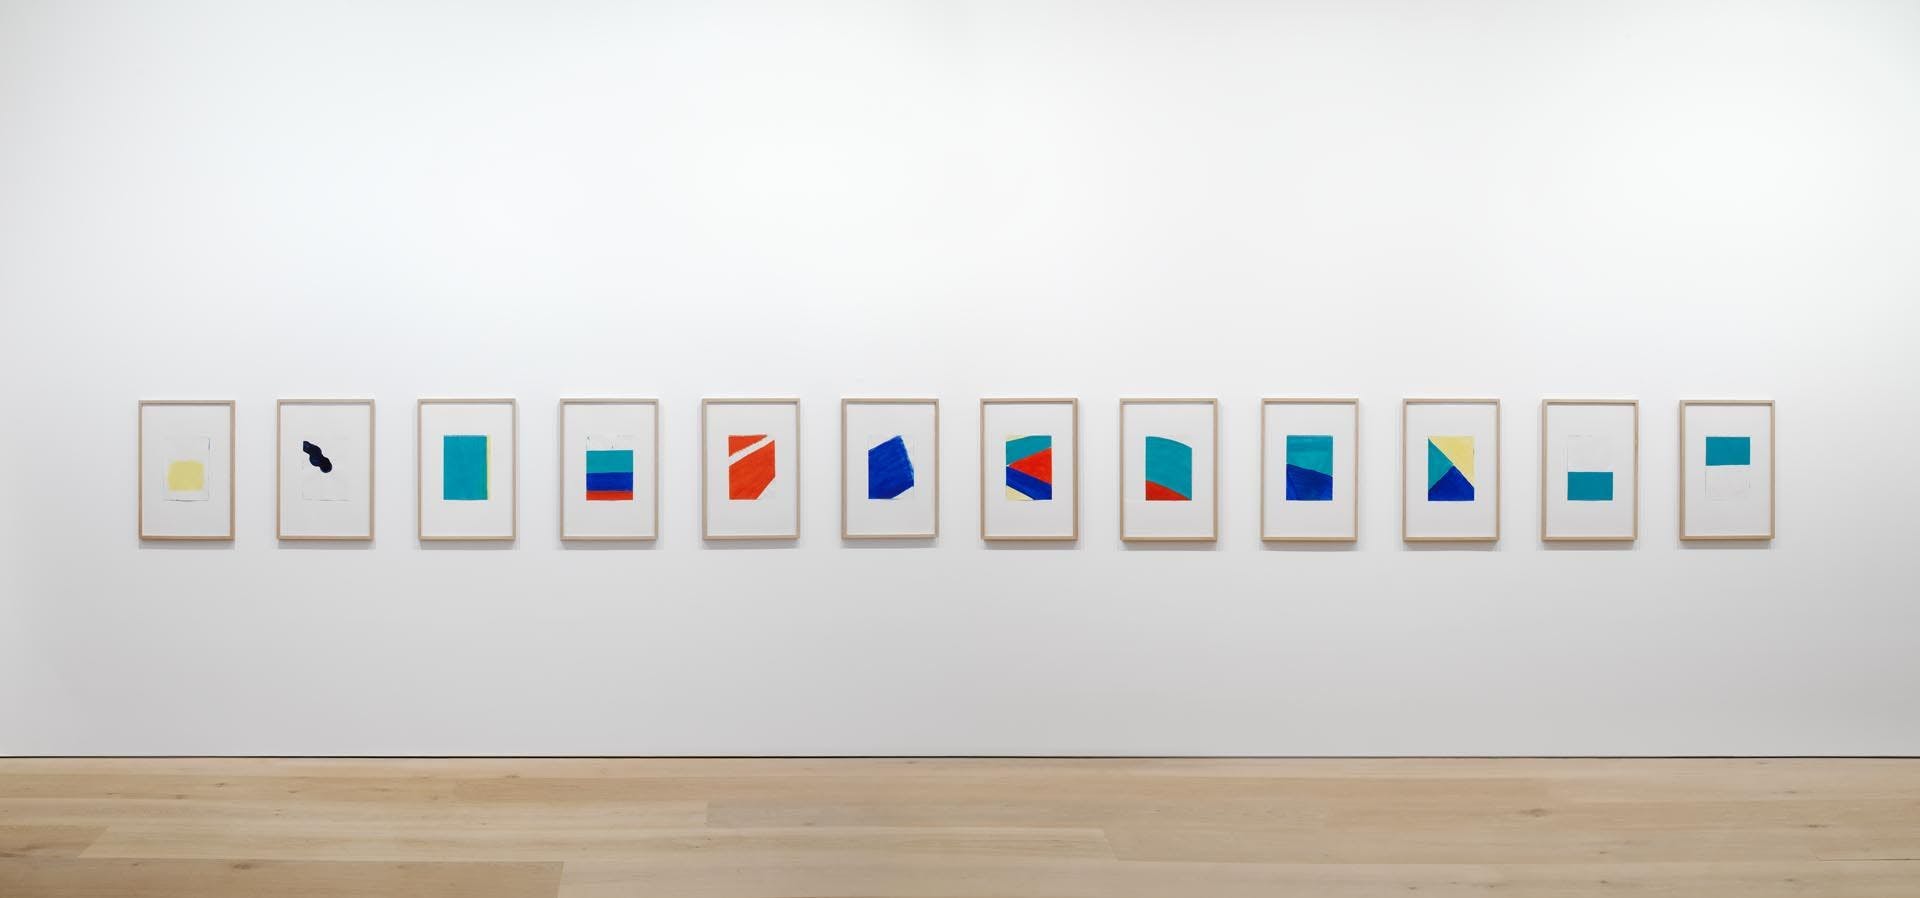 Installation view of the exhibition Palermo: Works on Paper 1976 to 1977, at David Zwirner in New York, dated 2013.